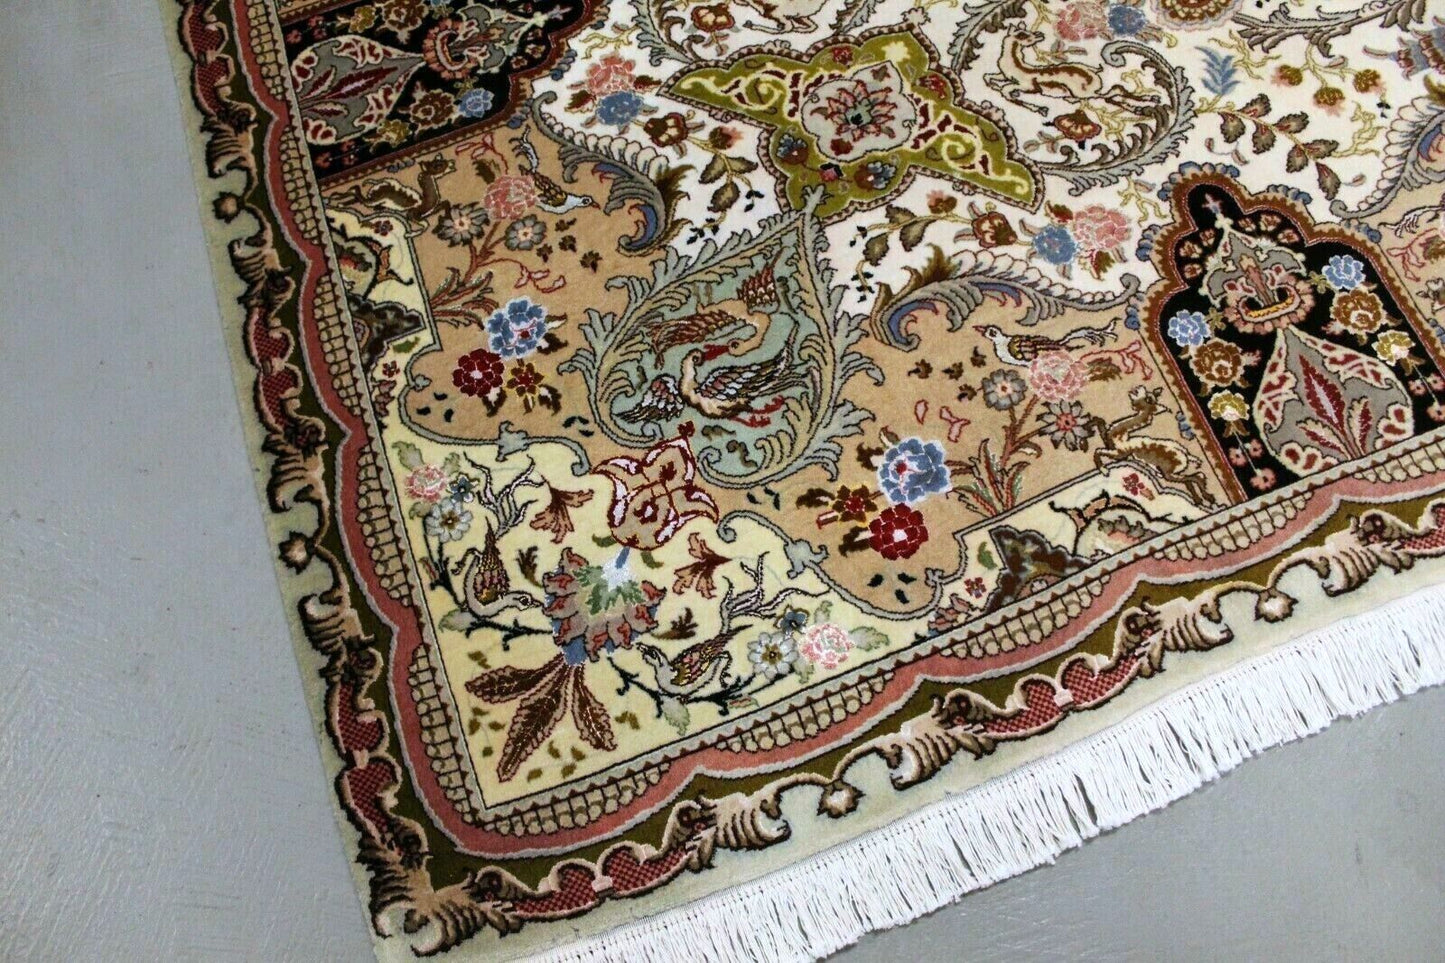  Close-up of intricate patterns on Handmade Vintage Persian Tabriz Rug - Detailed view showcasing the array of patterns, including floral motifs and ornate borders.